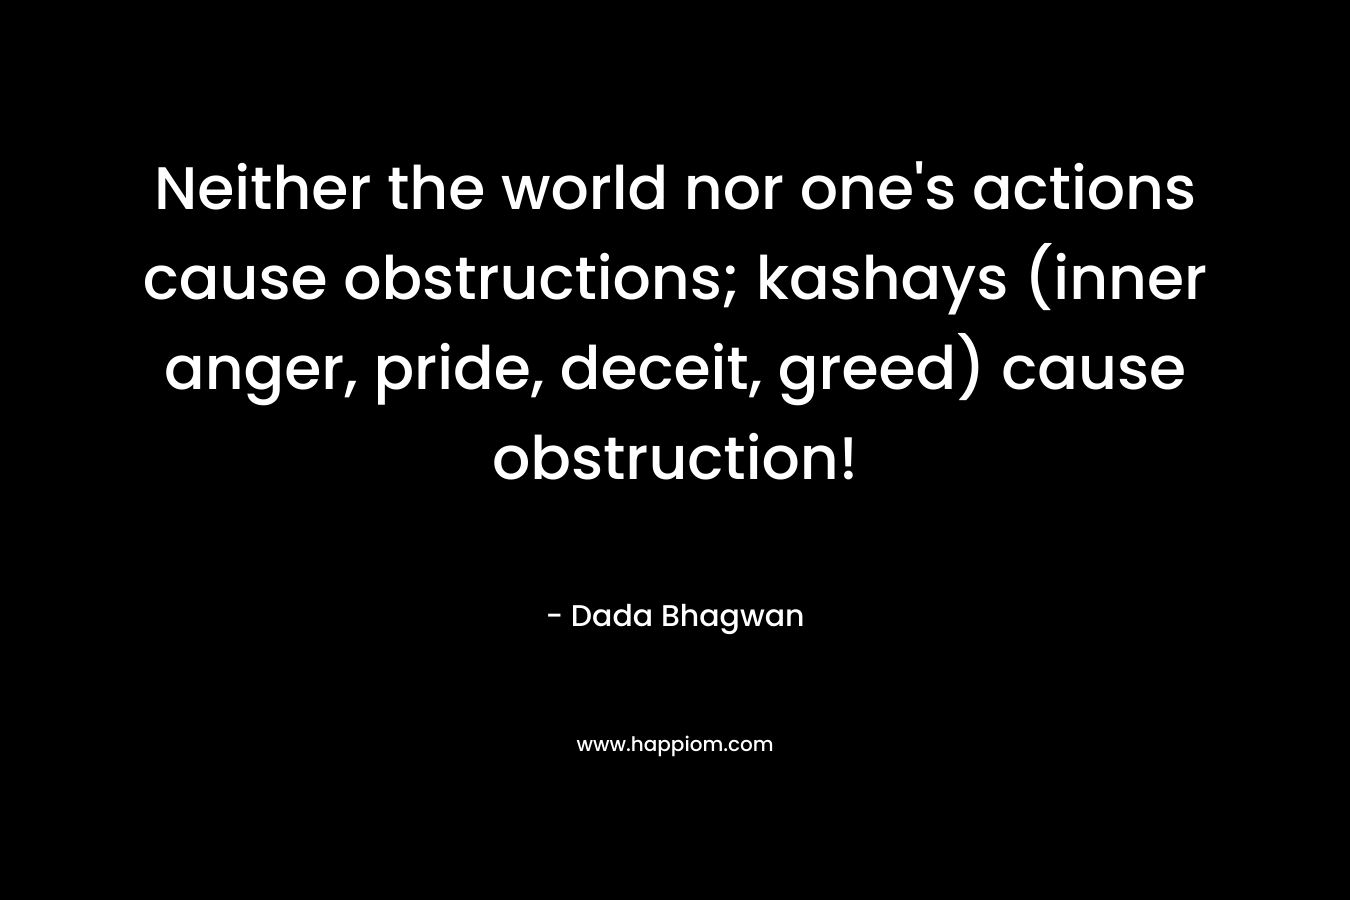 Neither the world nor one’s actions cause obstructions; kashays (inner anger, pride, deceit, greed) cause obstruction! – Dada Bhagwan